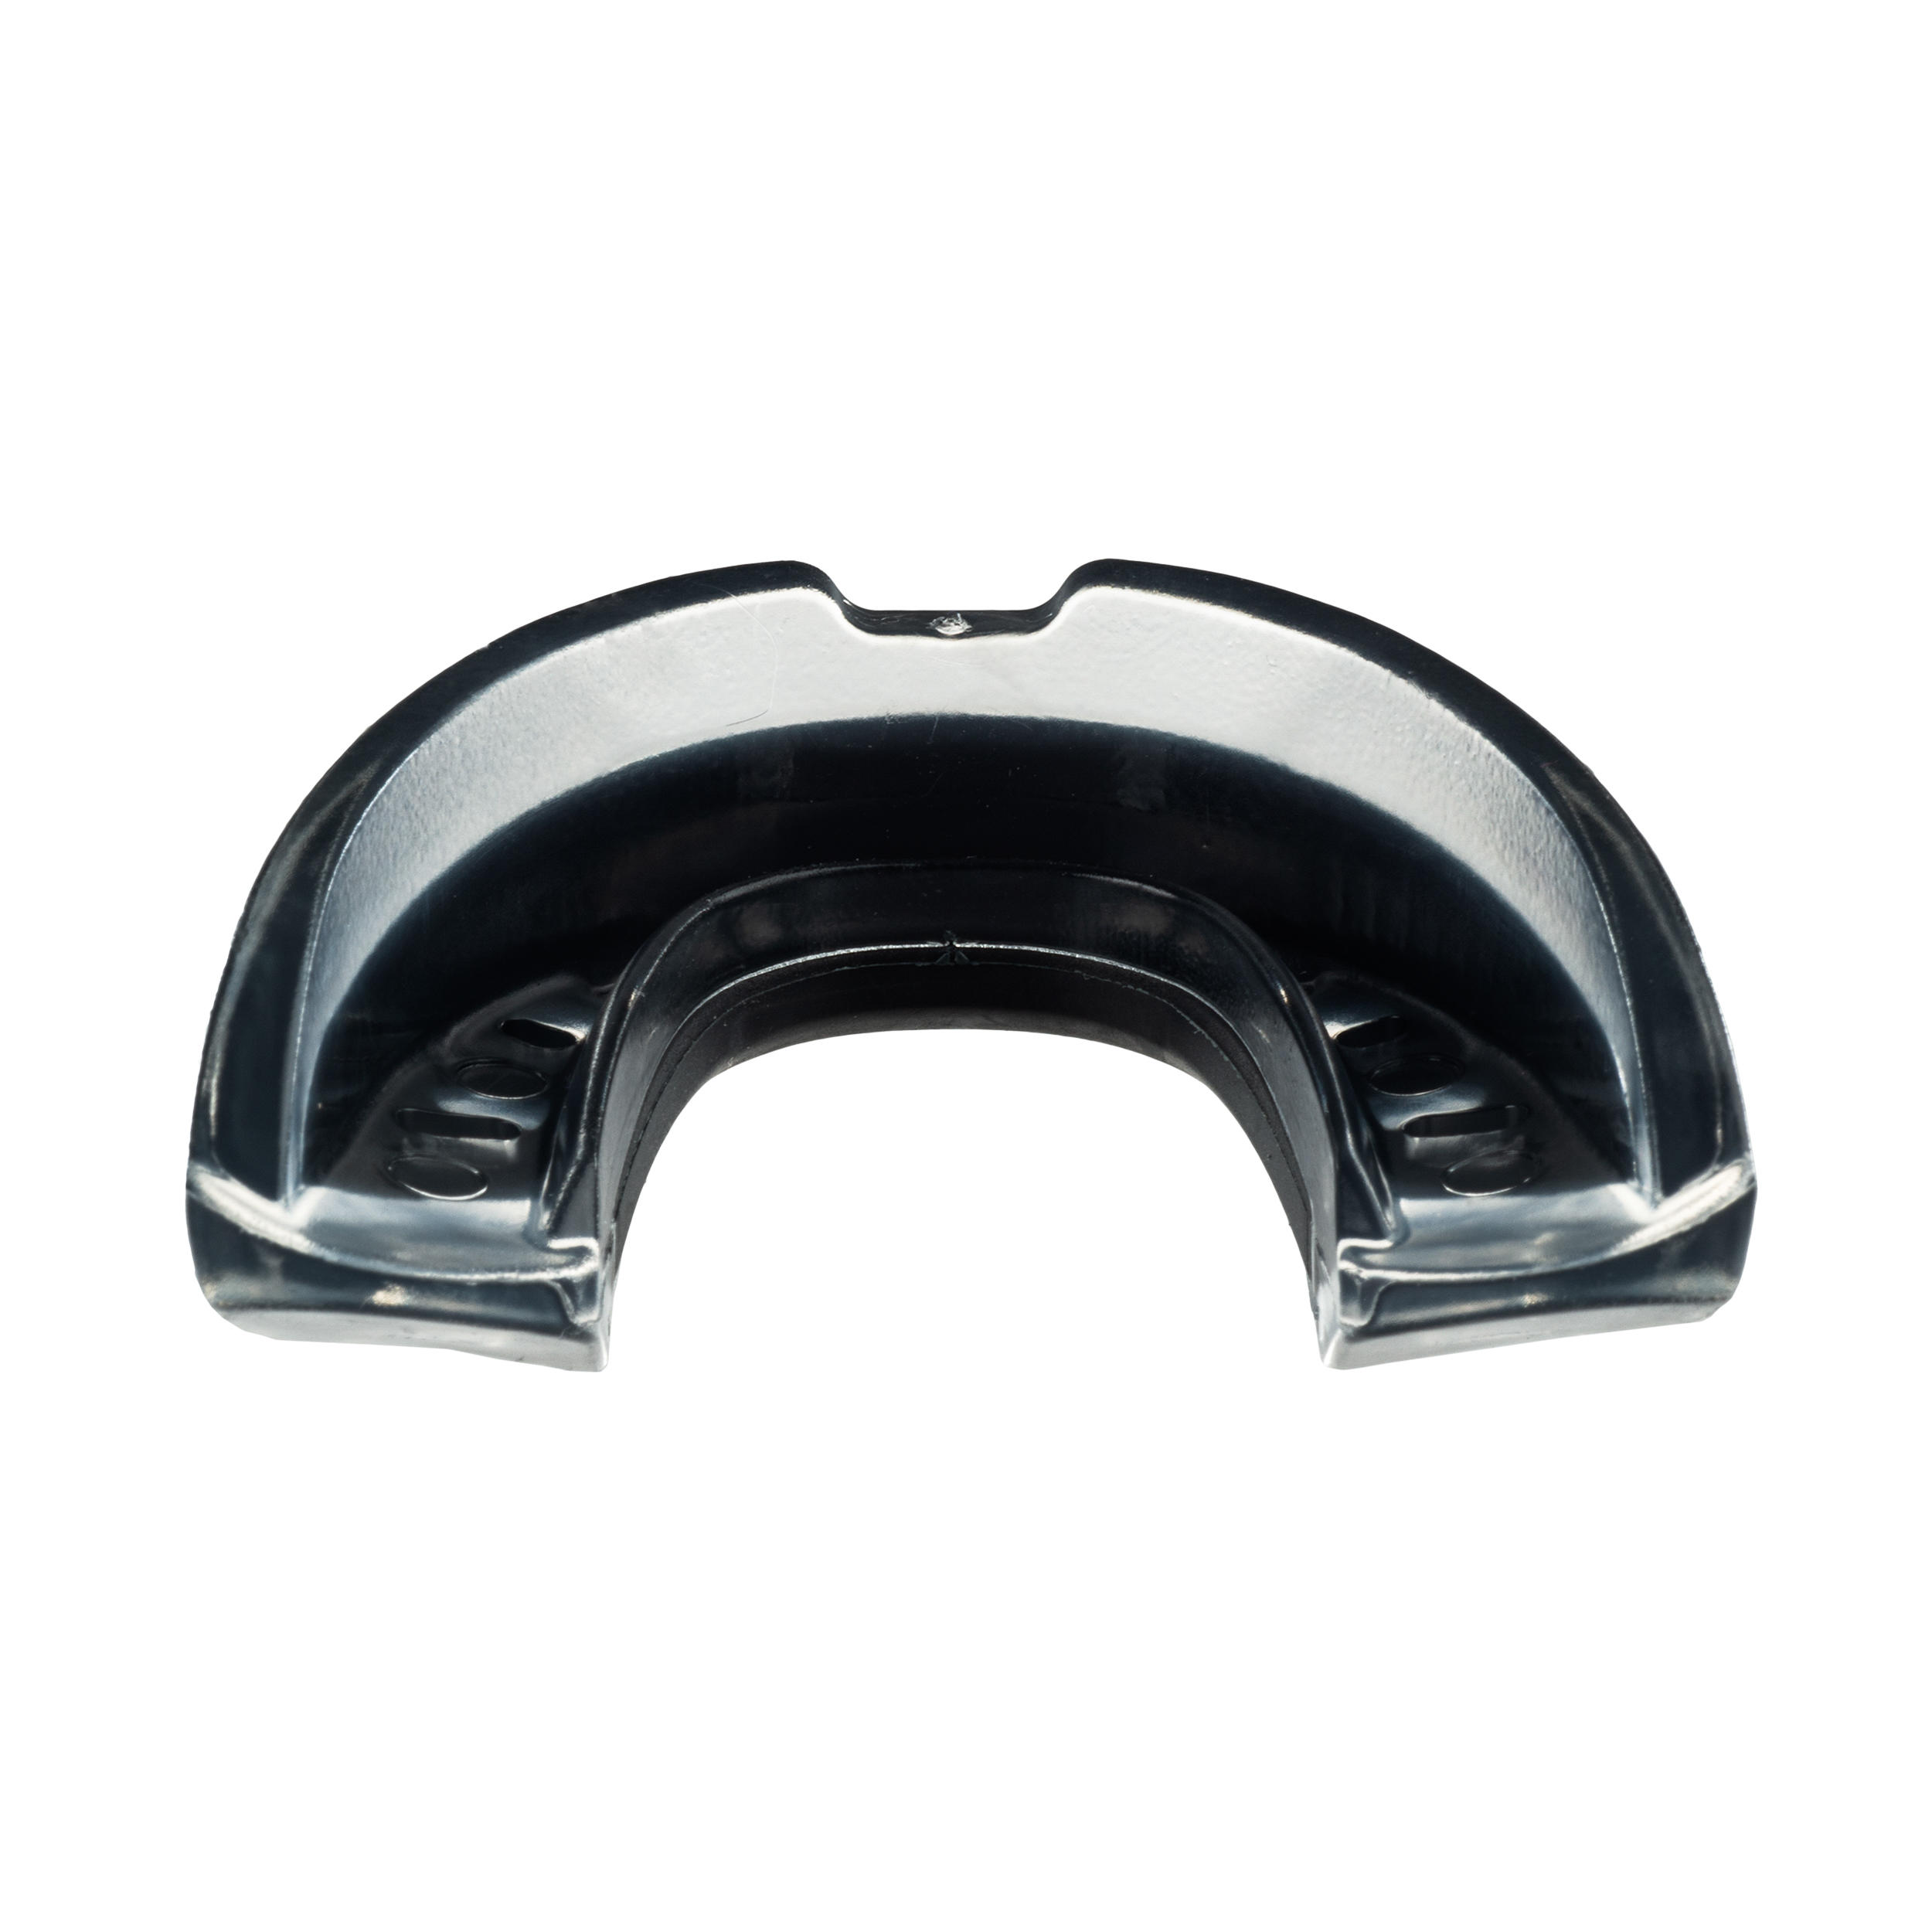 Rugby Mouthguard R500 Size M (Players 1.4 m To 1.7 m) - Black 3/6